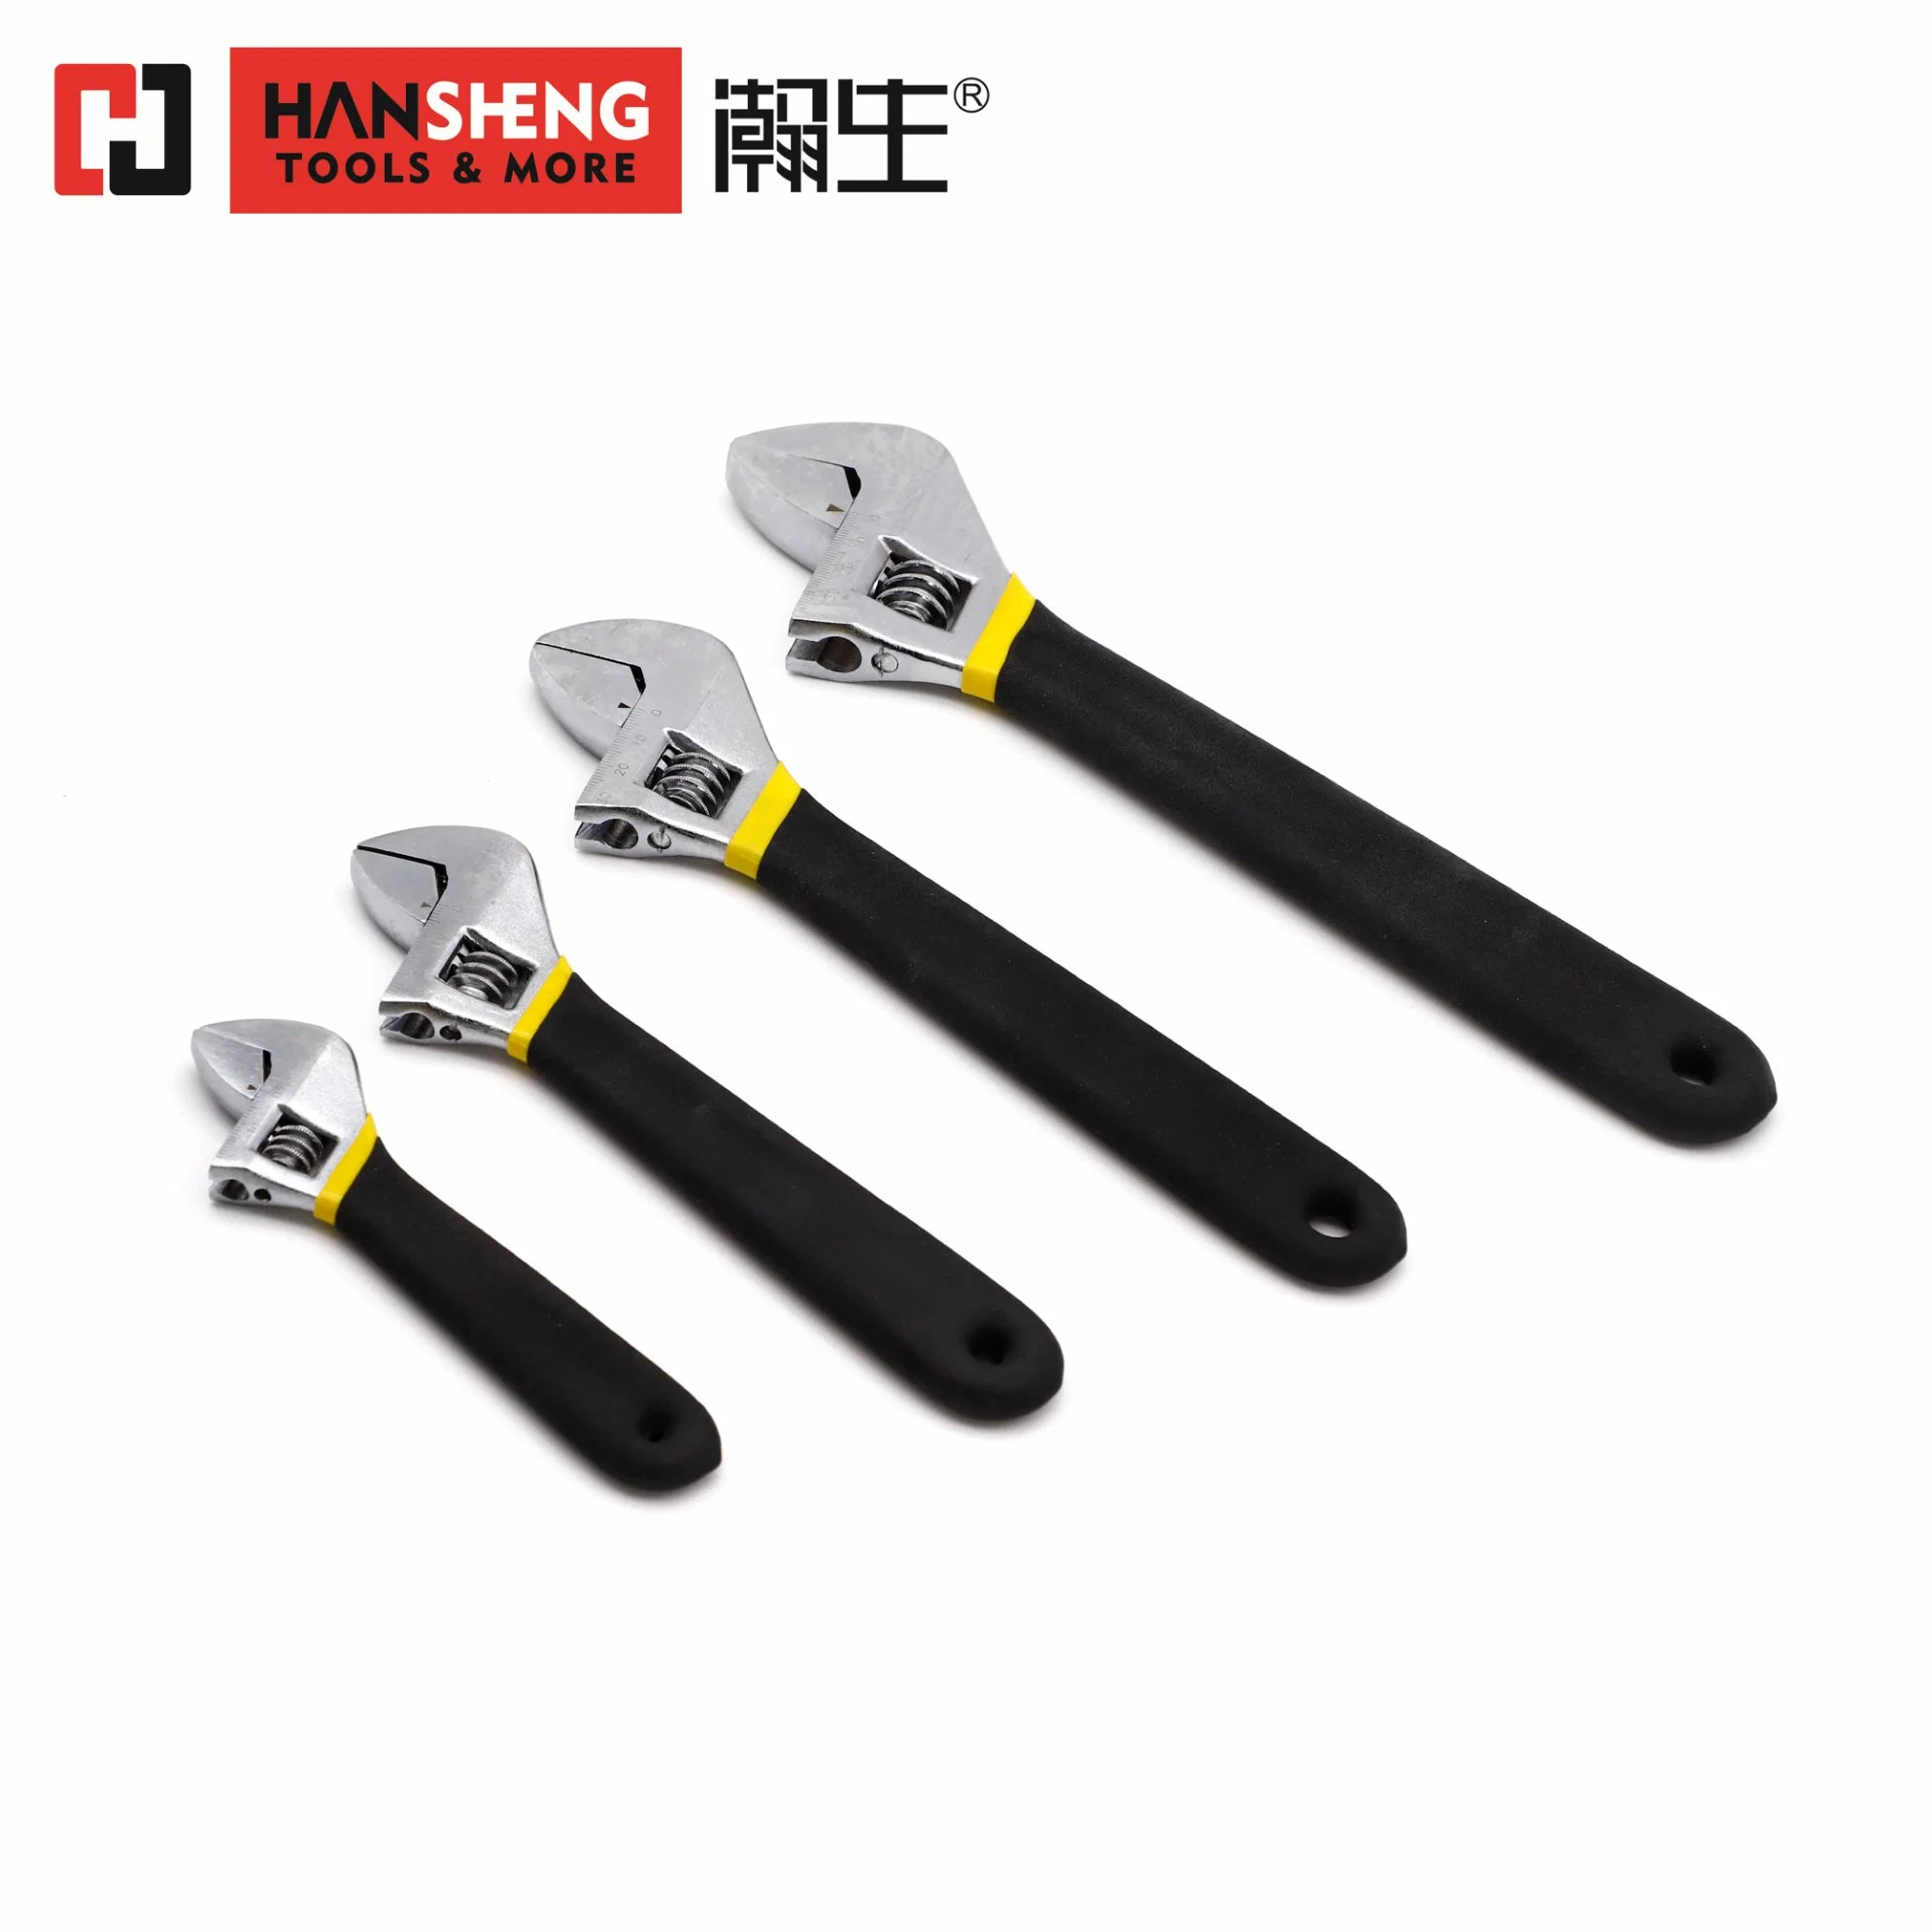 Professional Hand Tool, Hardware, Made of Carbon Steel, Chrome Plated, Dipped Handle, Adjustable Wrench Spanner